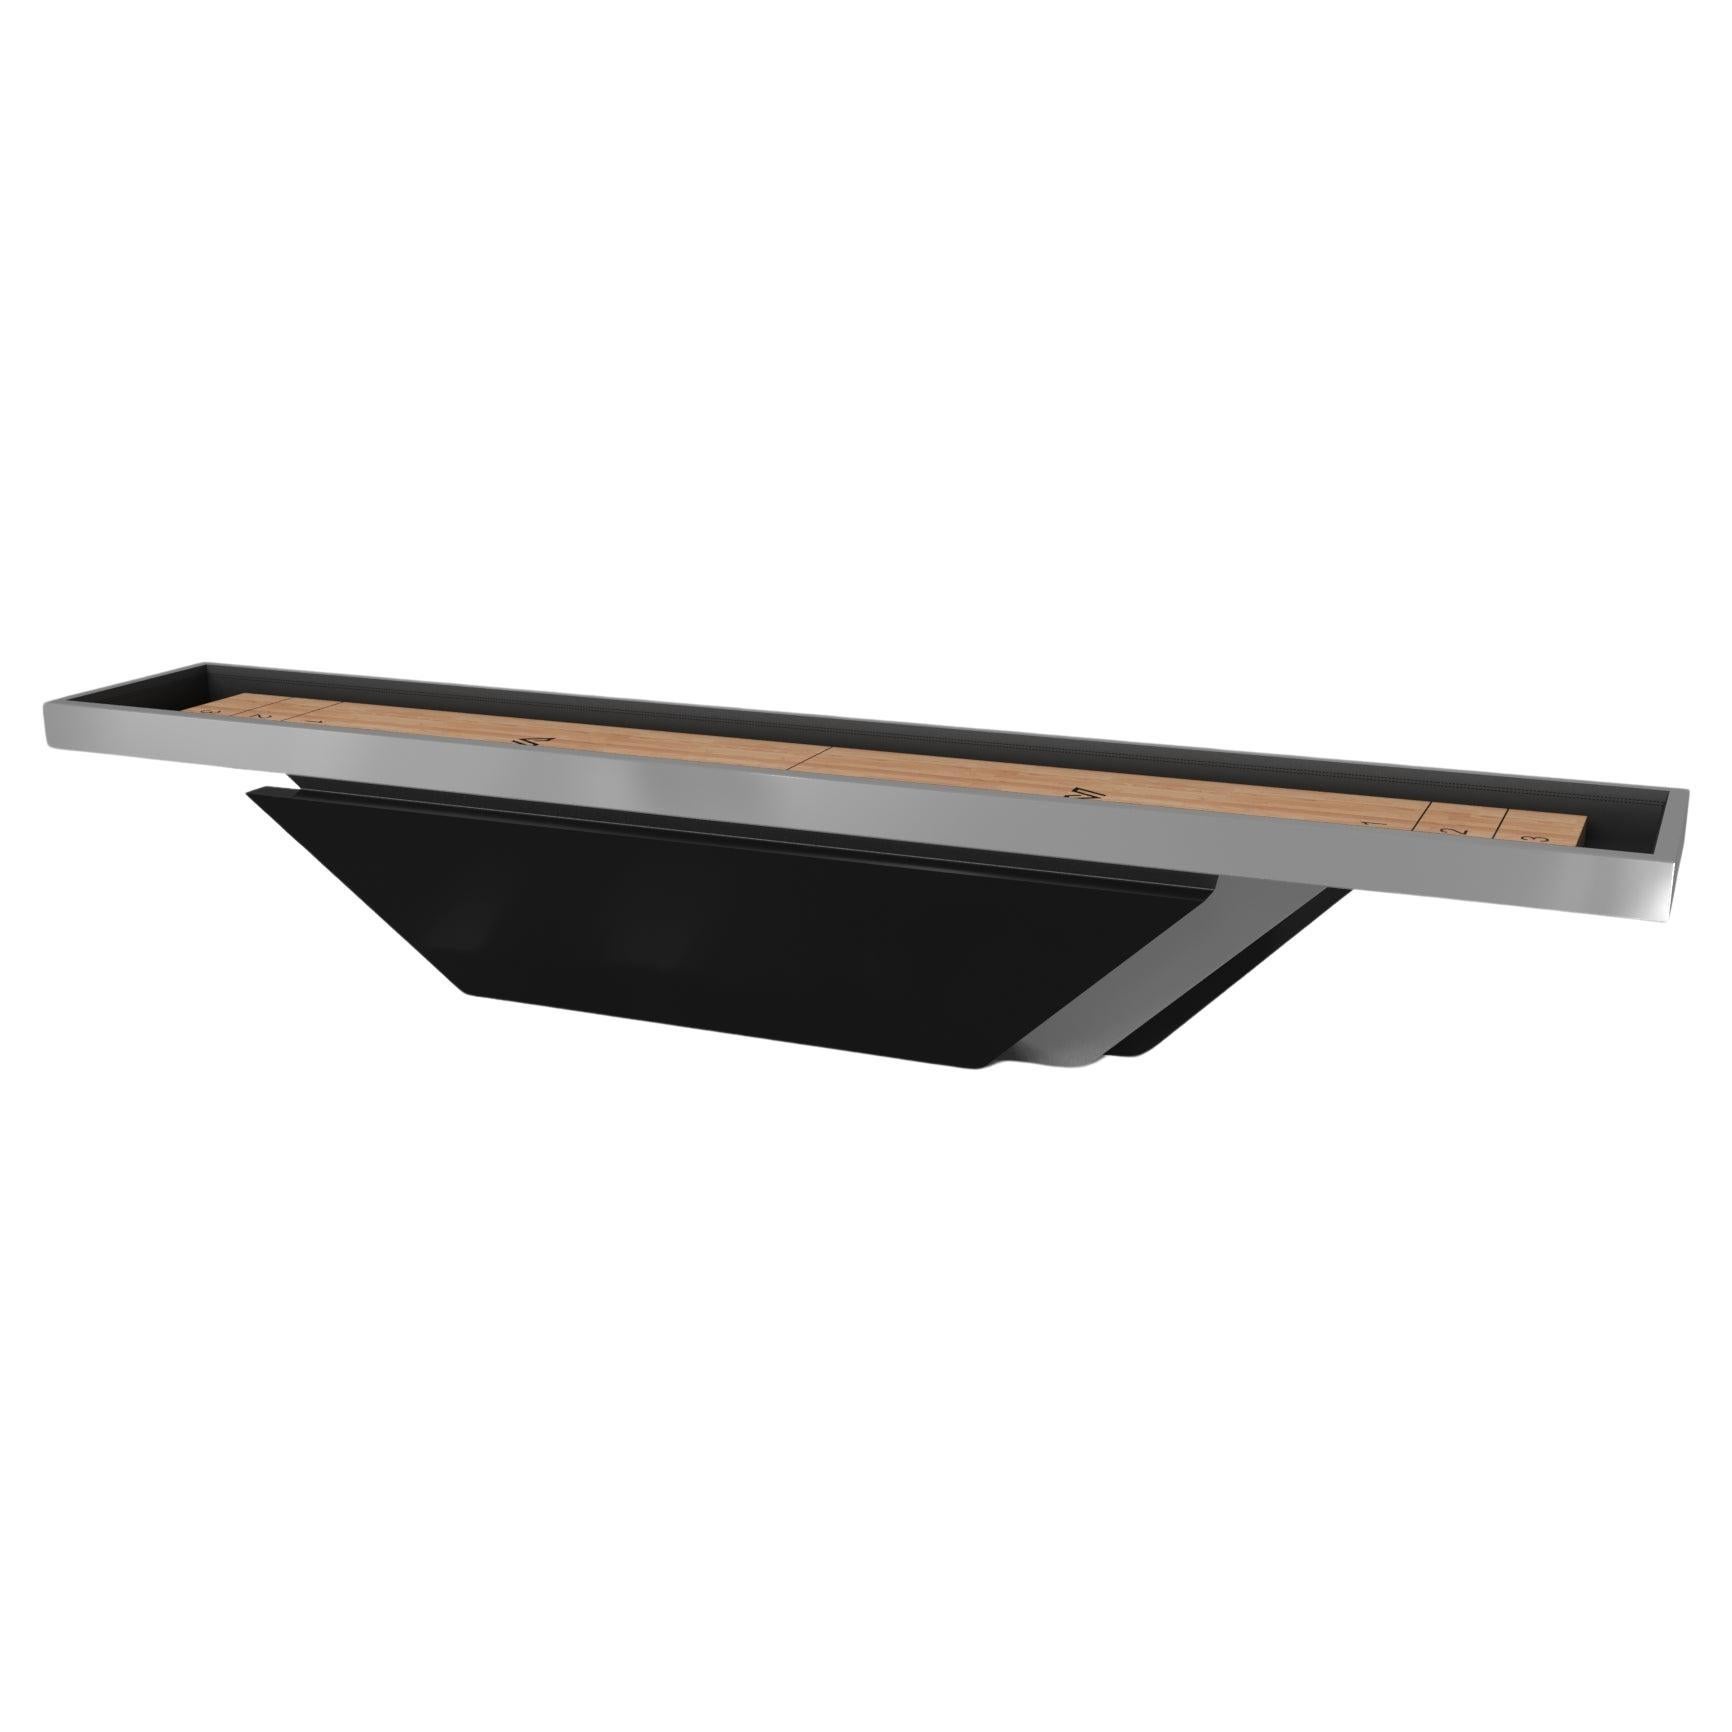 Elevate Customs Vogue Shuffleboard Tables/Stainless Steel Sheet Metal in 12'-USA